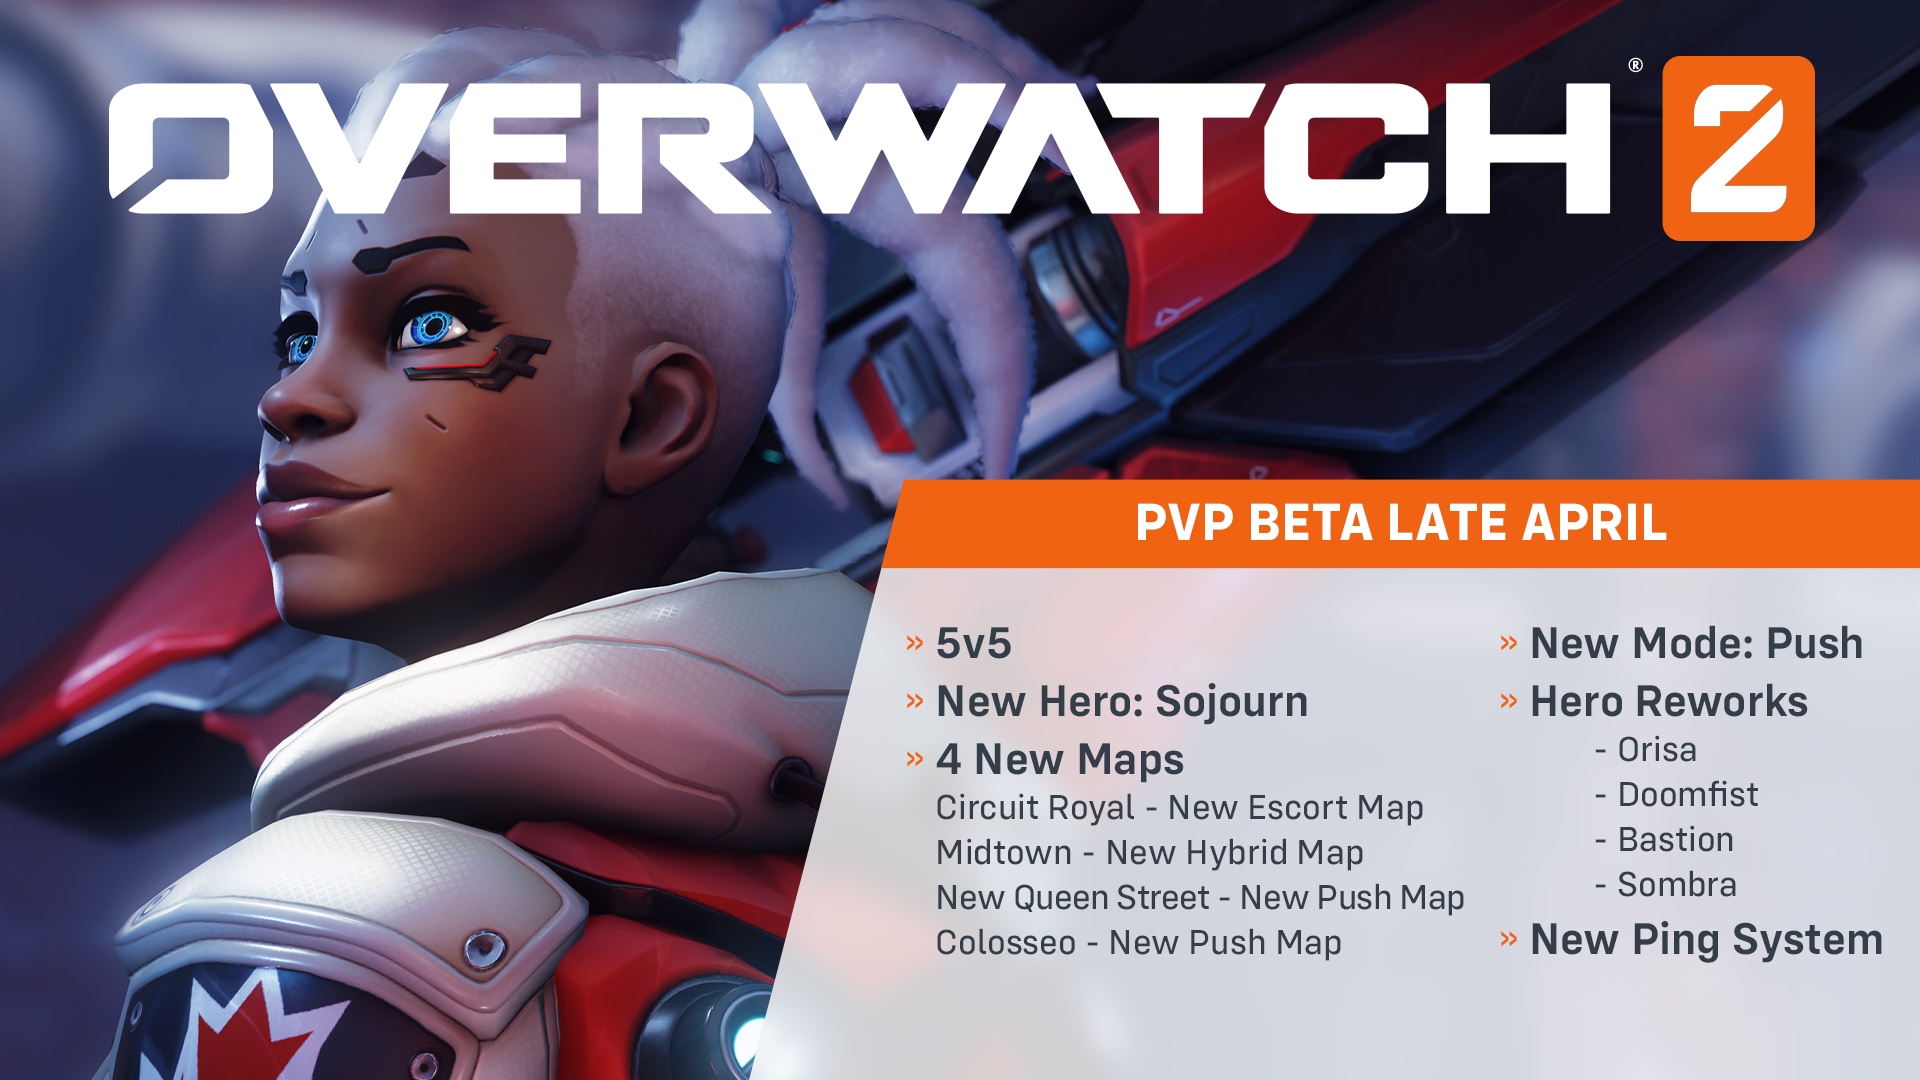 OW_Beta1Overview_Sojourn_B03-JP02_NoESRB_Blizzardcom_Launcher_1920x1080.png